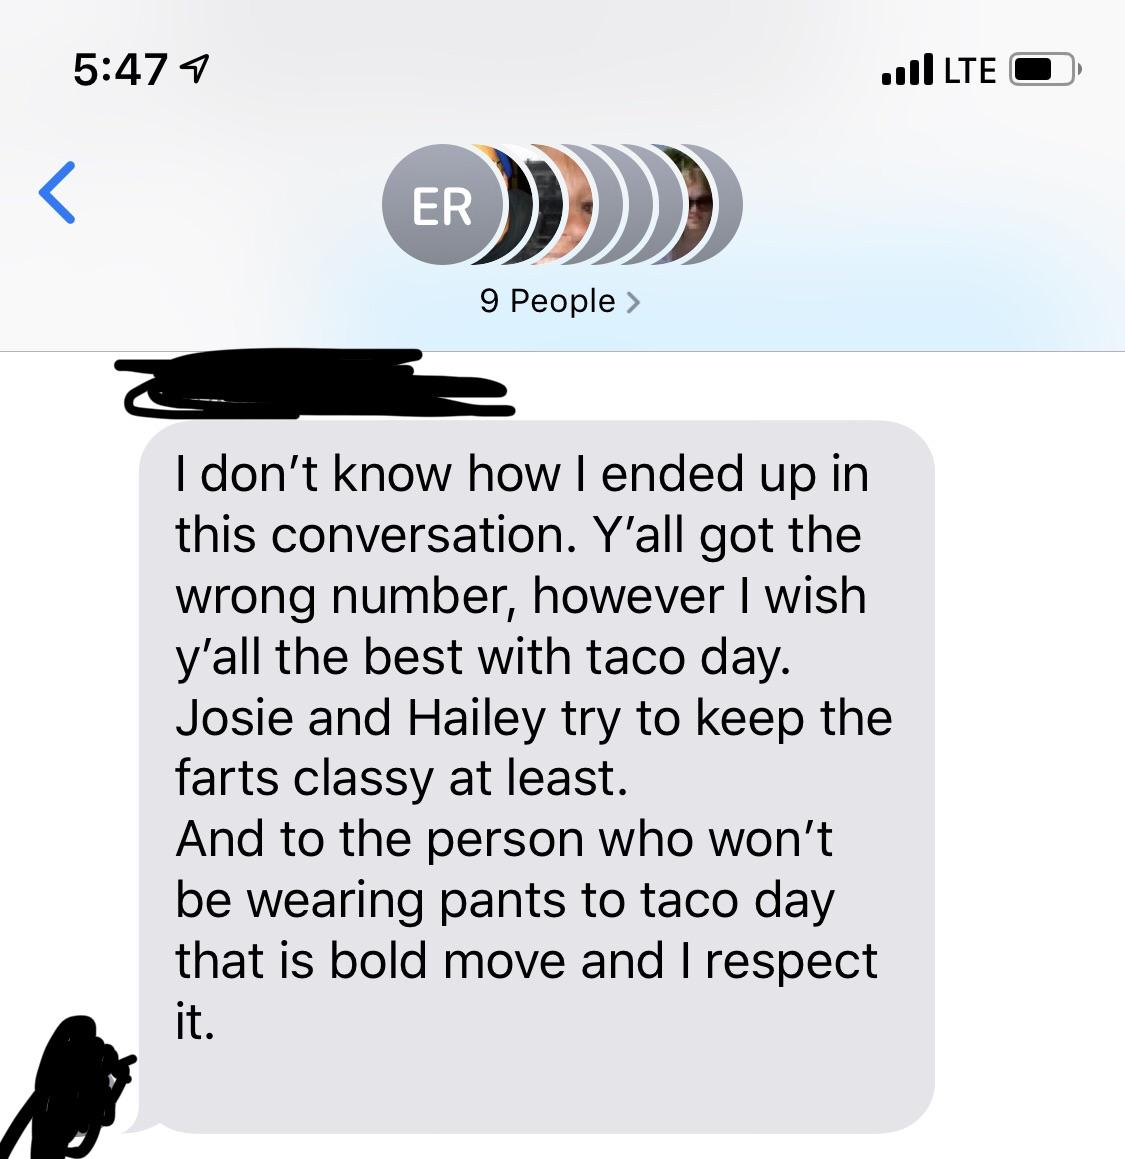 9 Jilte O Er Er 9 People > I don't know how I ended up in this conversation. Y'all got the wrong number, however I wish y'all the best with taco day. Josie and Hailey try to keep the farts classy at least. And to the person who won't be wearing pants to…